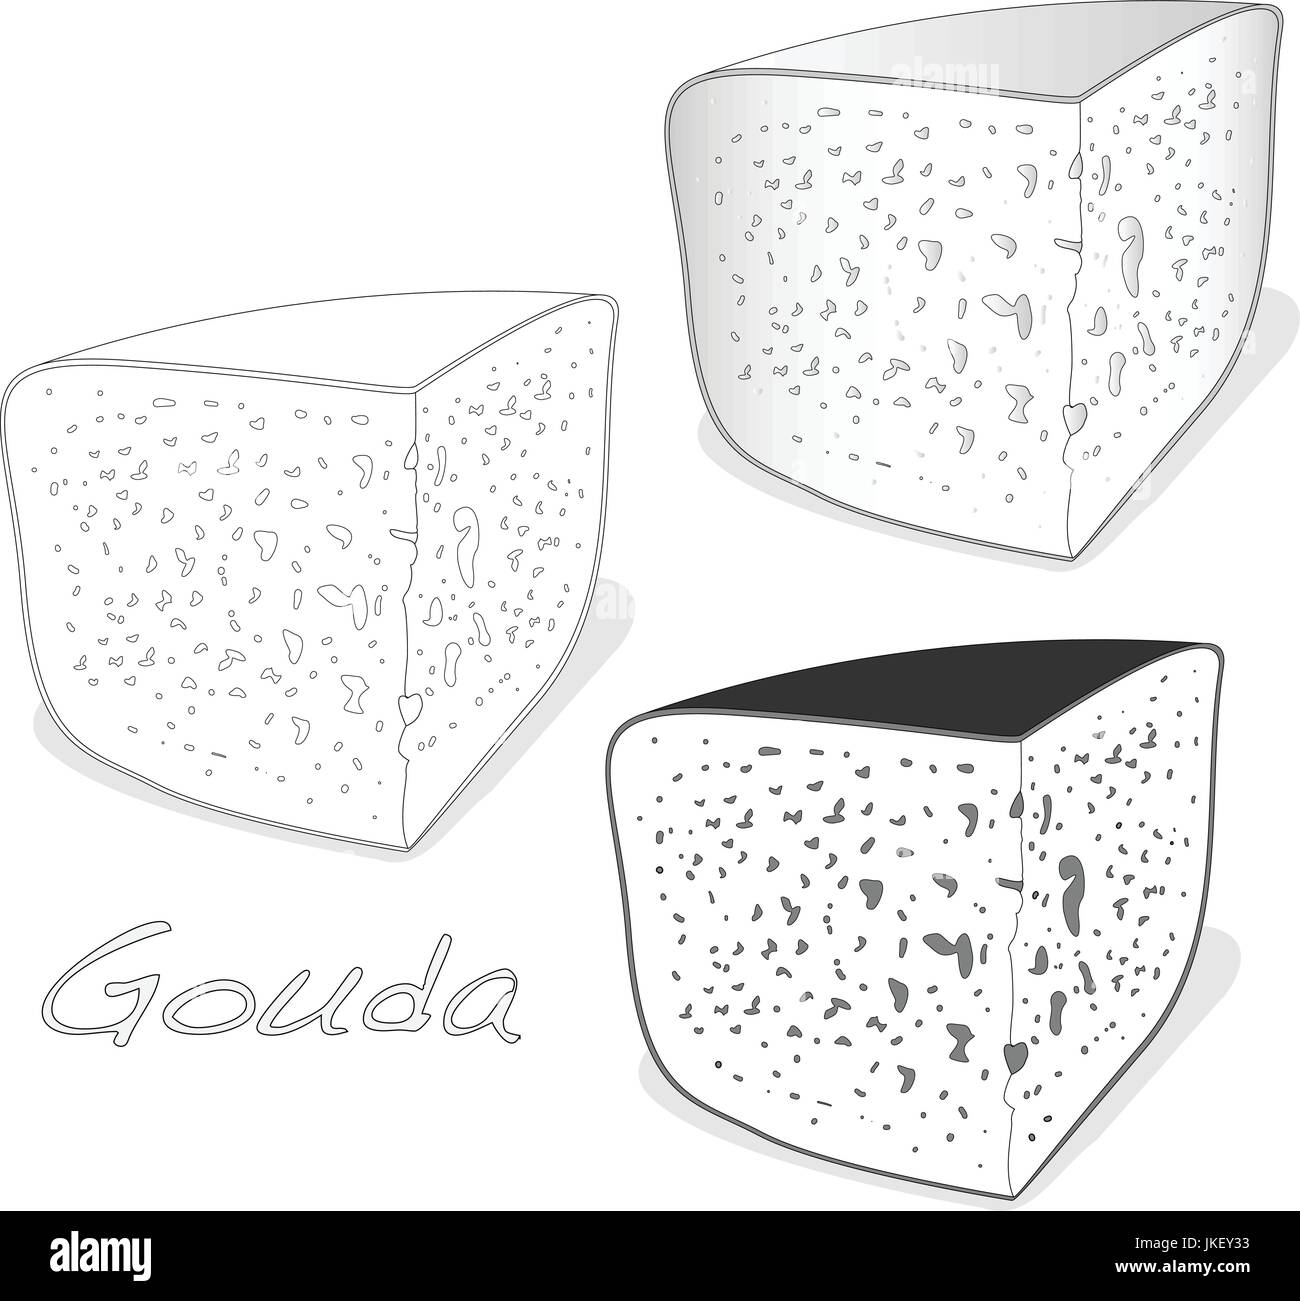 Isolated Gouda cheese illustration on a white background Stock Vector